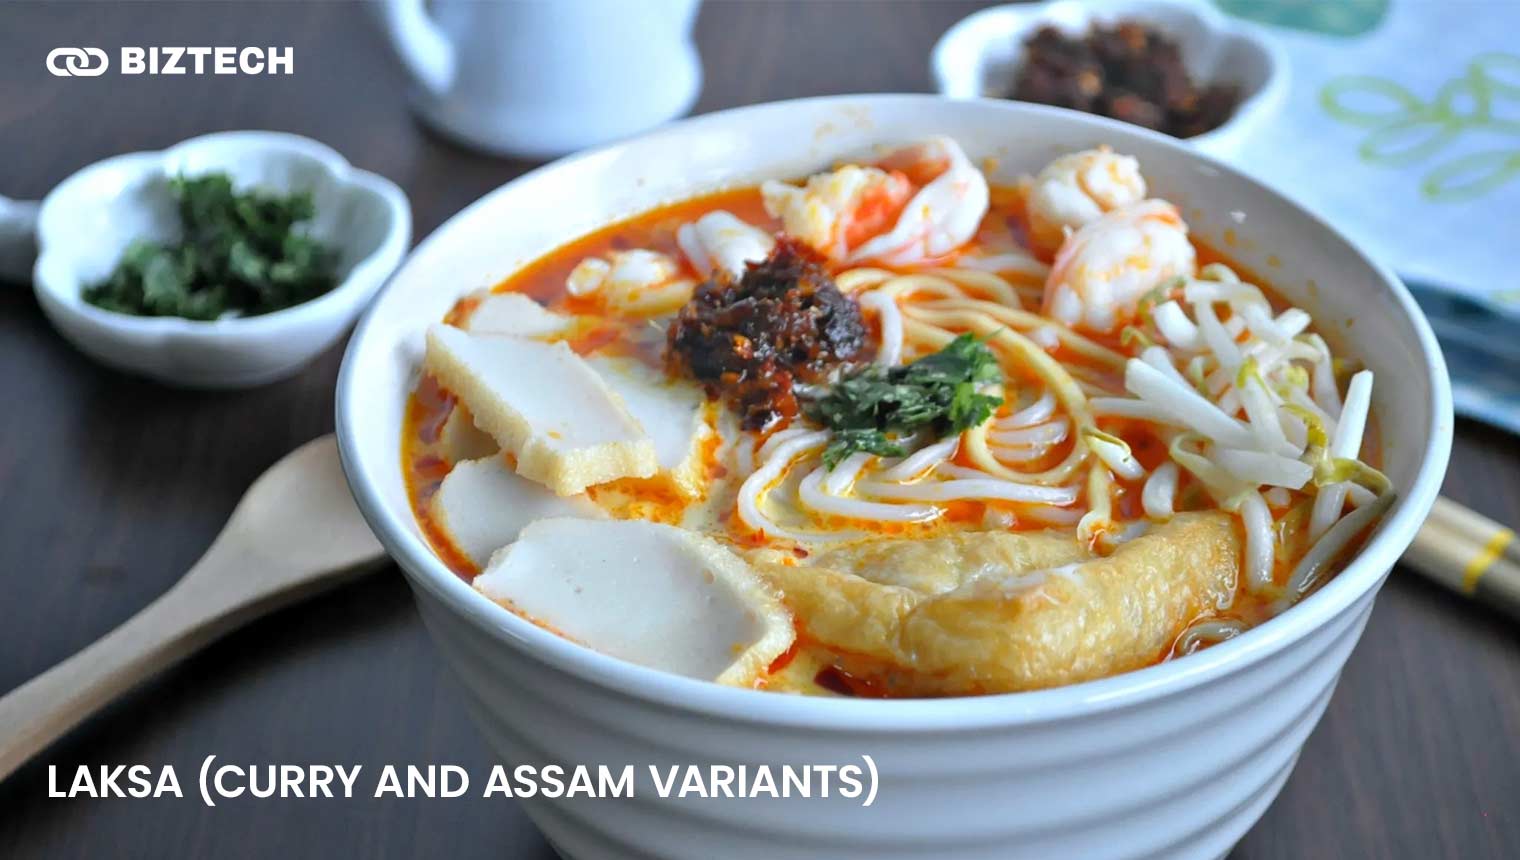 Laksa (Curry and Assam variants)